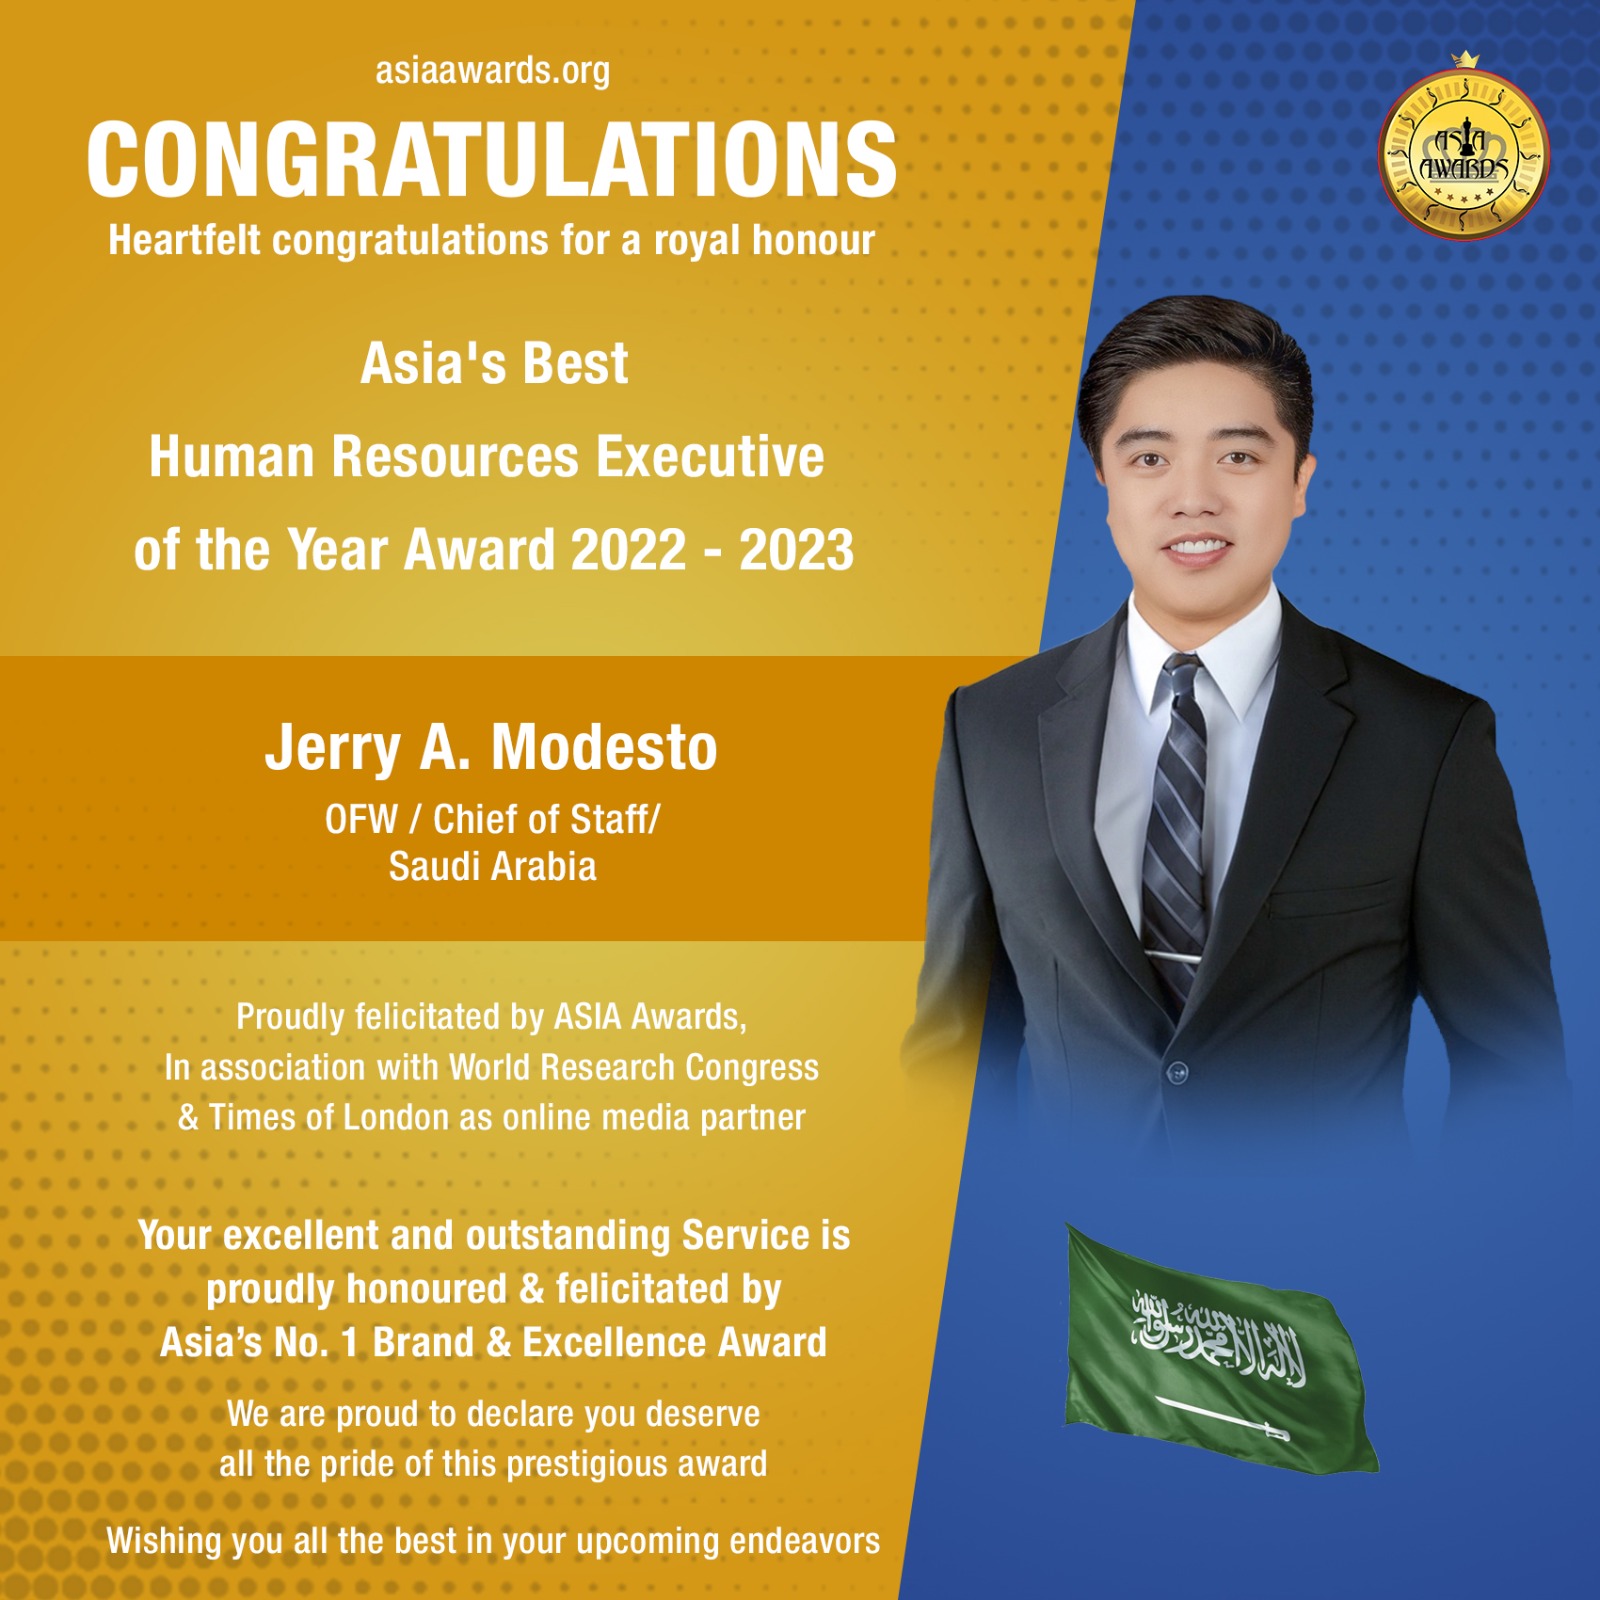 Jerry A. Modesto Has bagged Asia's Best Human Resources Executive of the Year Award